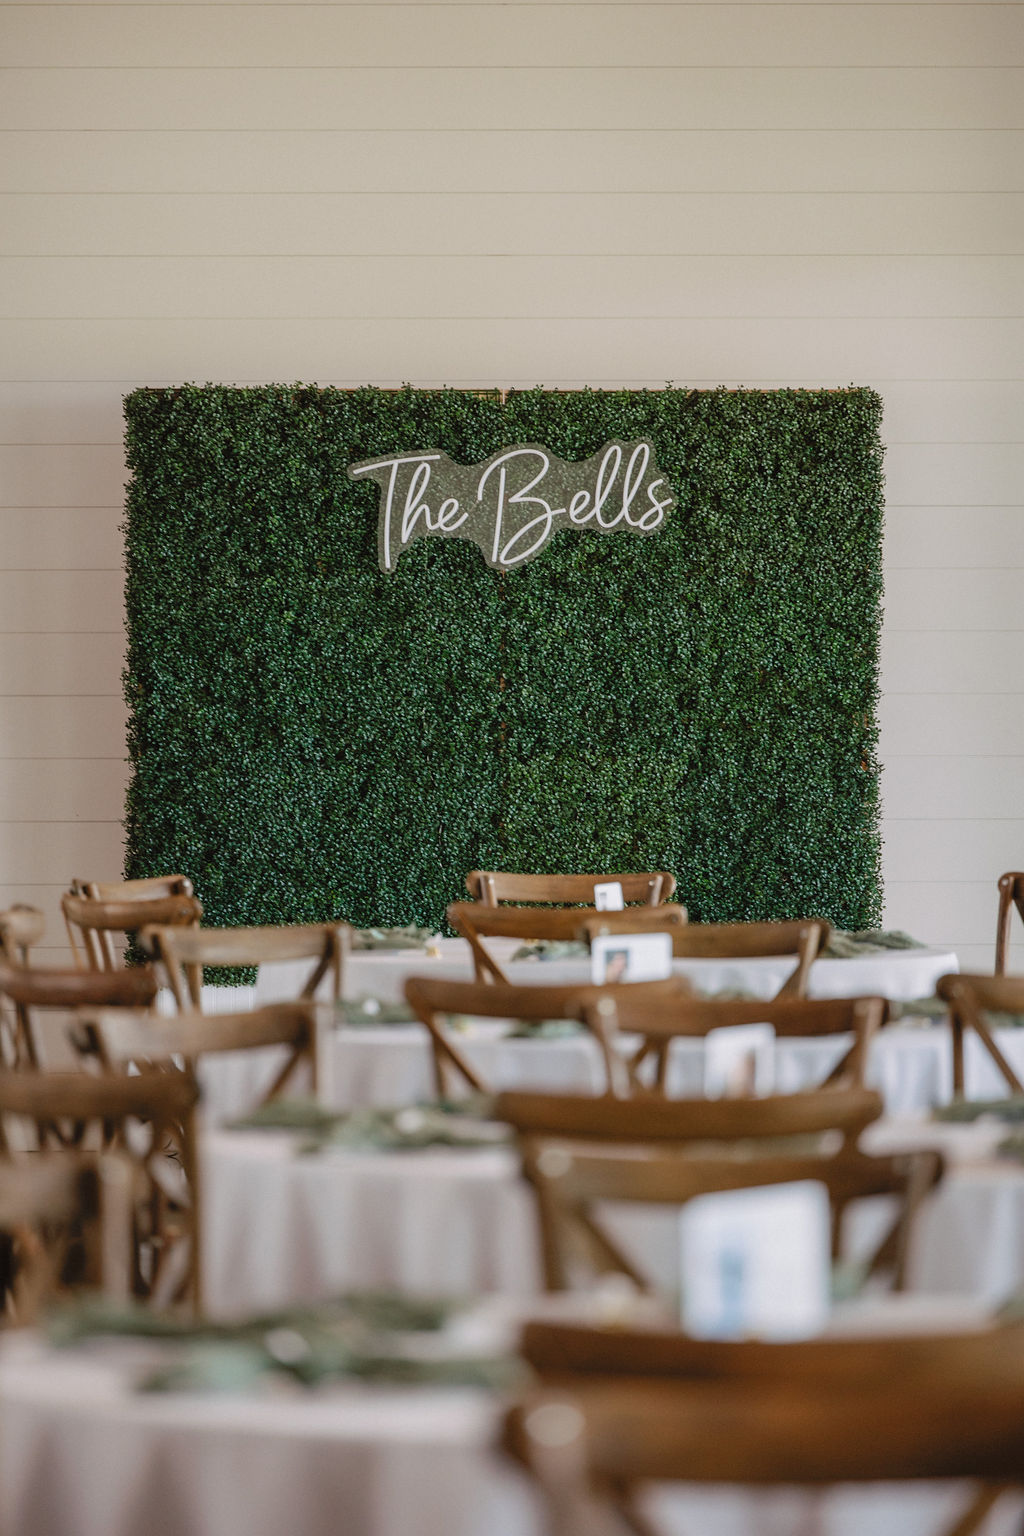 A green hedge wall decoration with the words "The Bells" in white script, positioned behind rows of wooden chairs and round tables covered with white cloths.